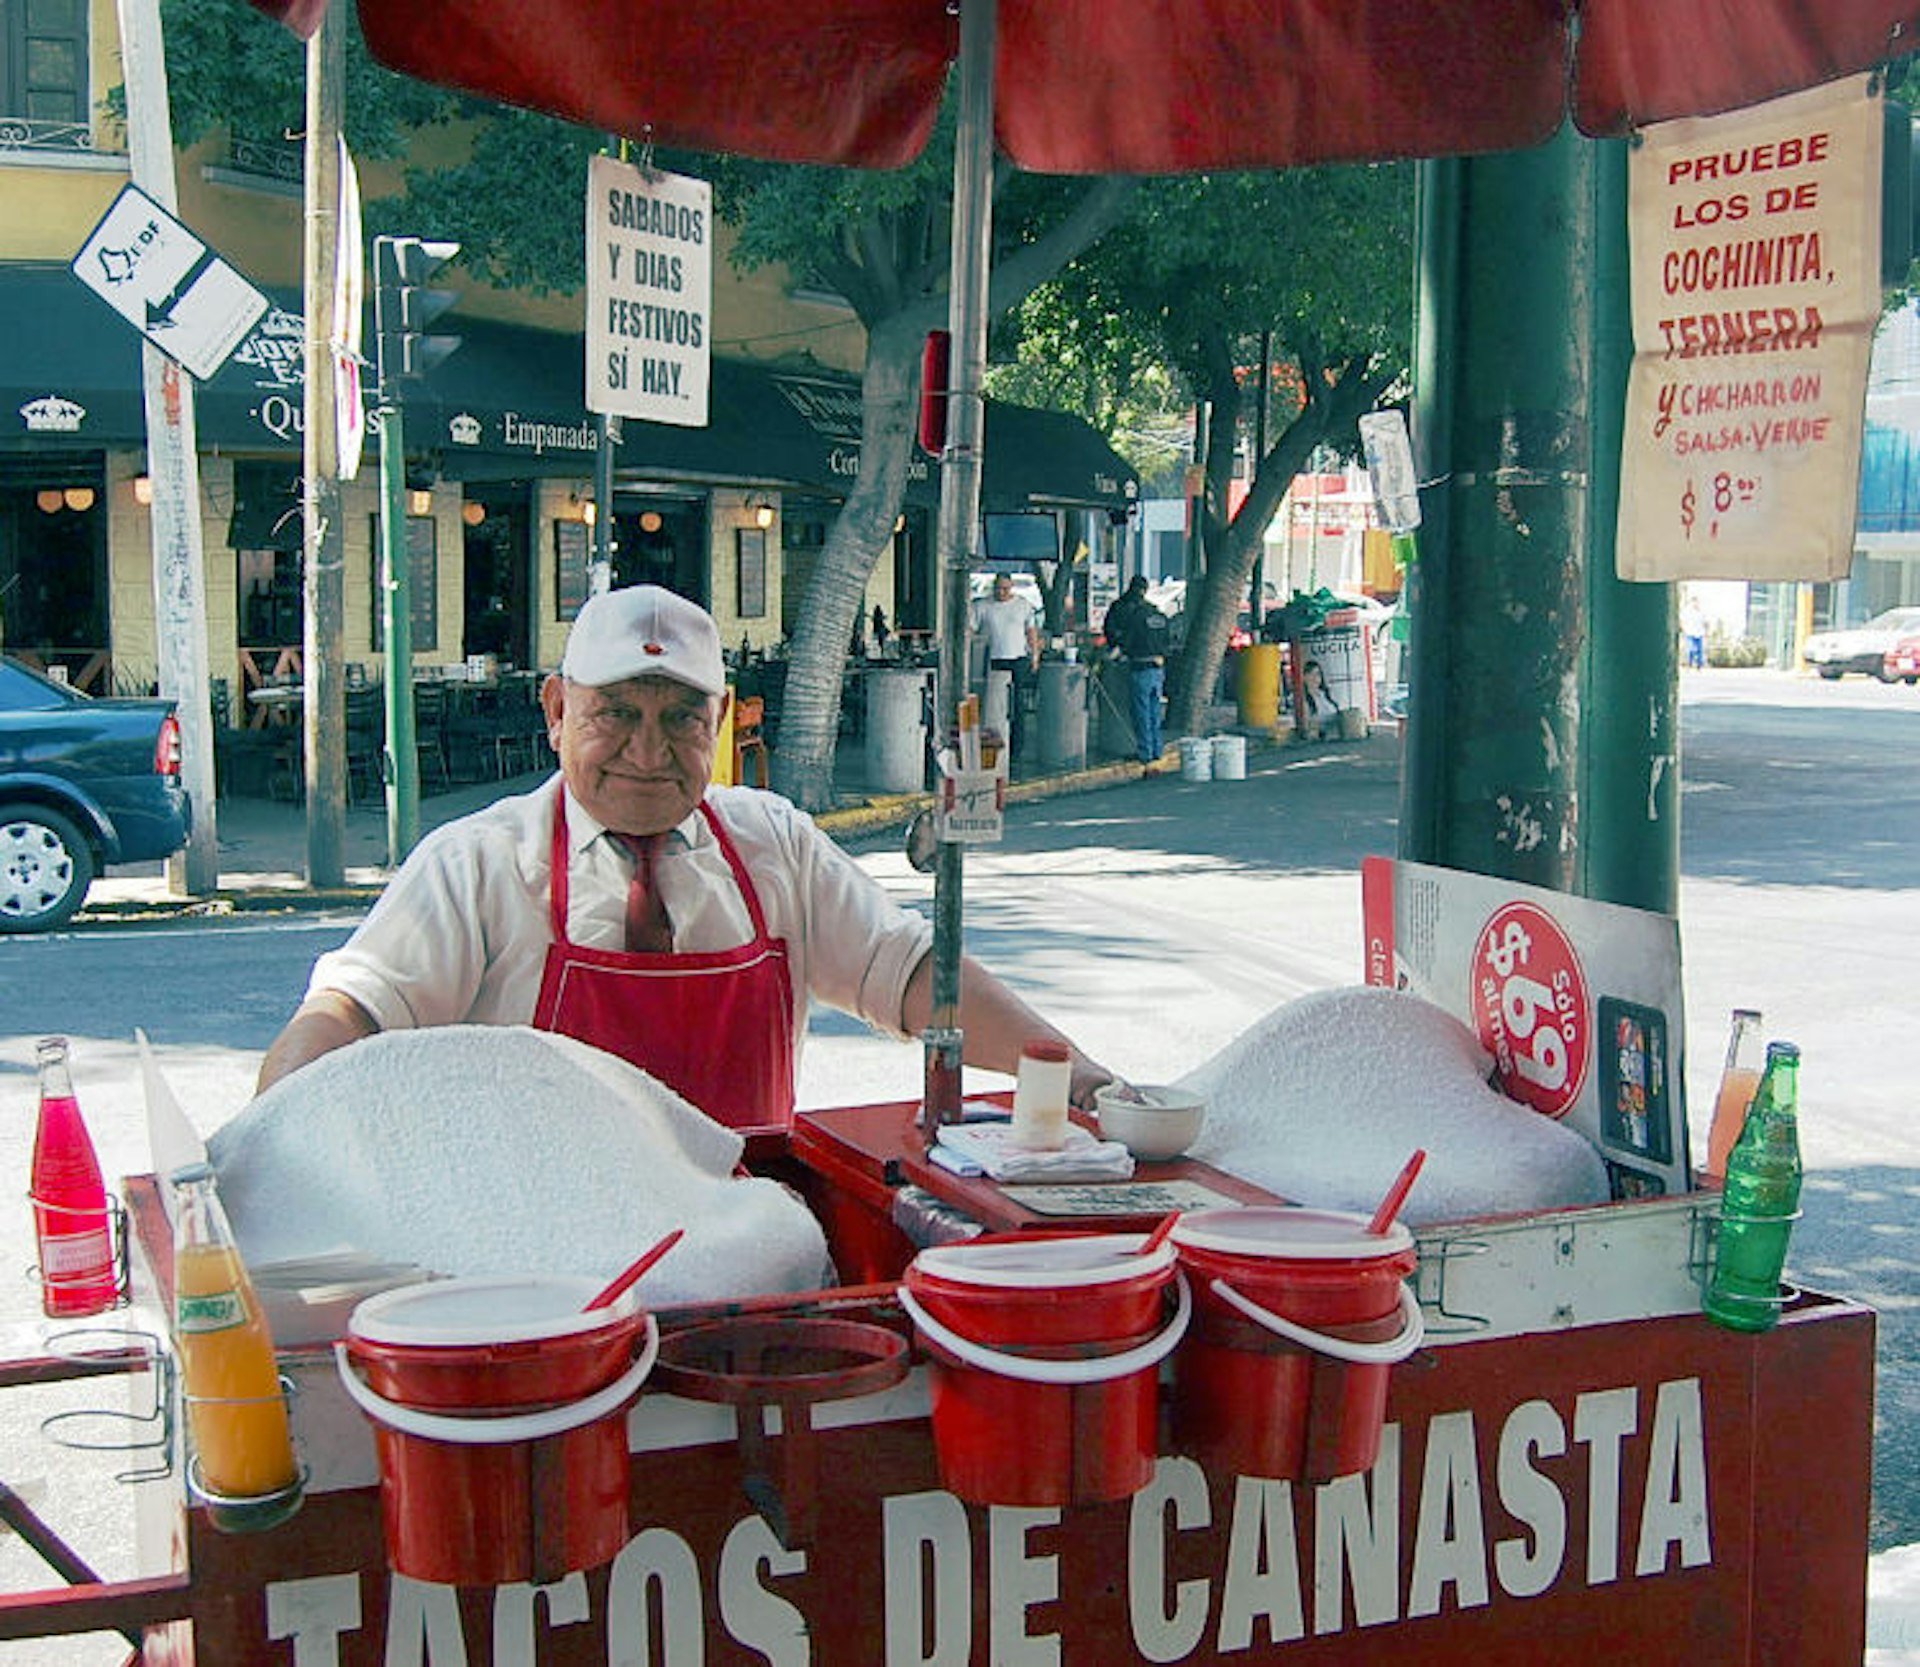 Tacos de Canasta from the affable Senor. Image by Katja Gaskell / Lonely Planet